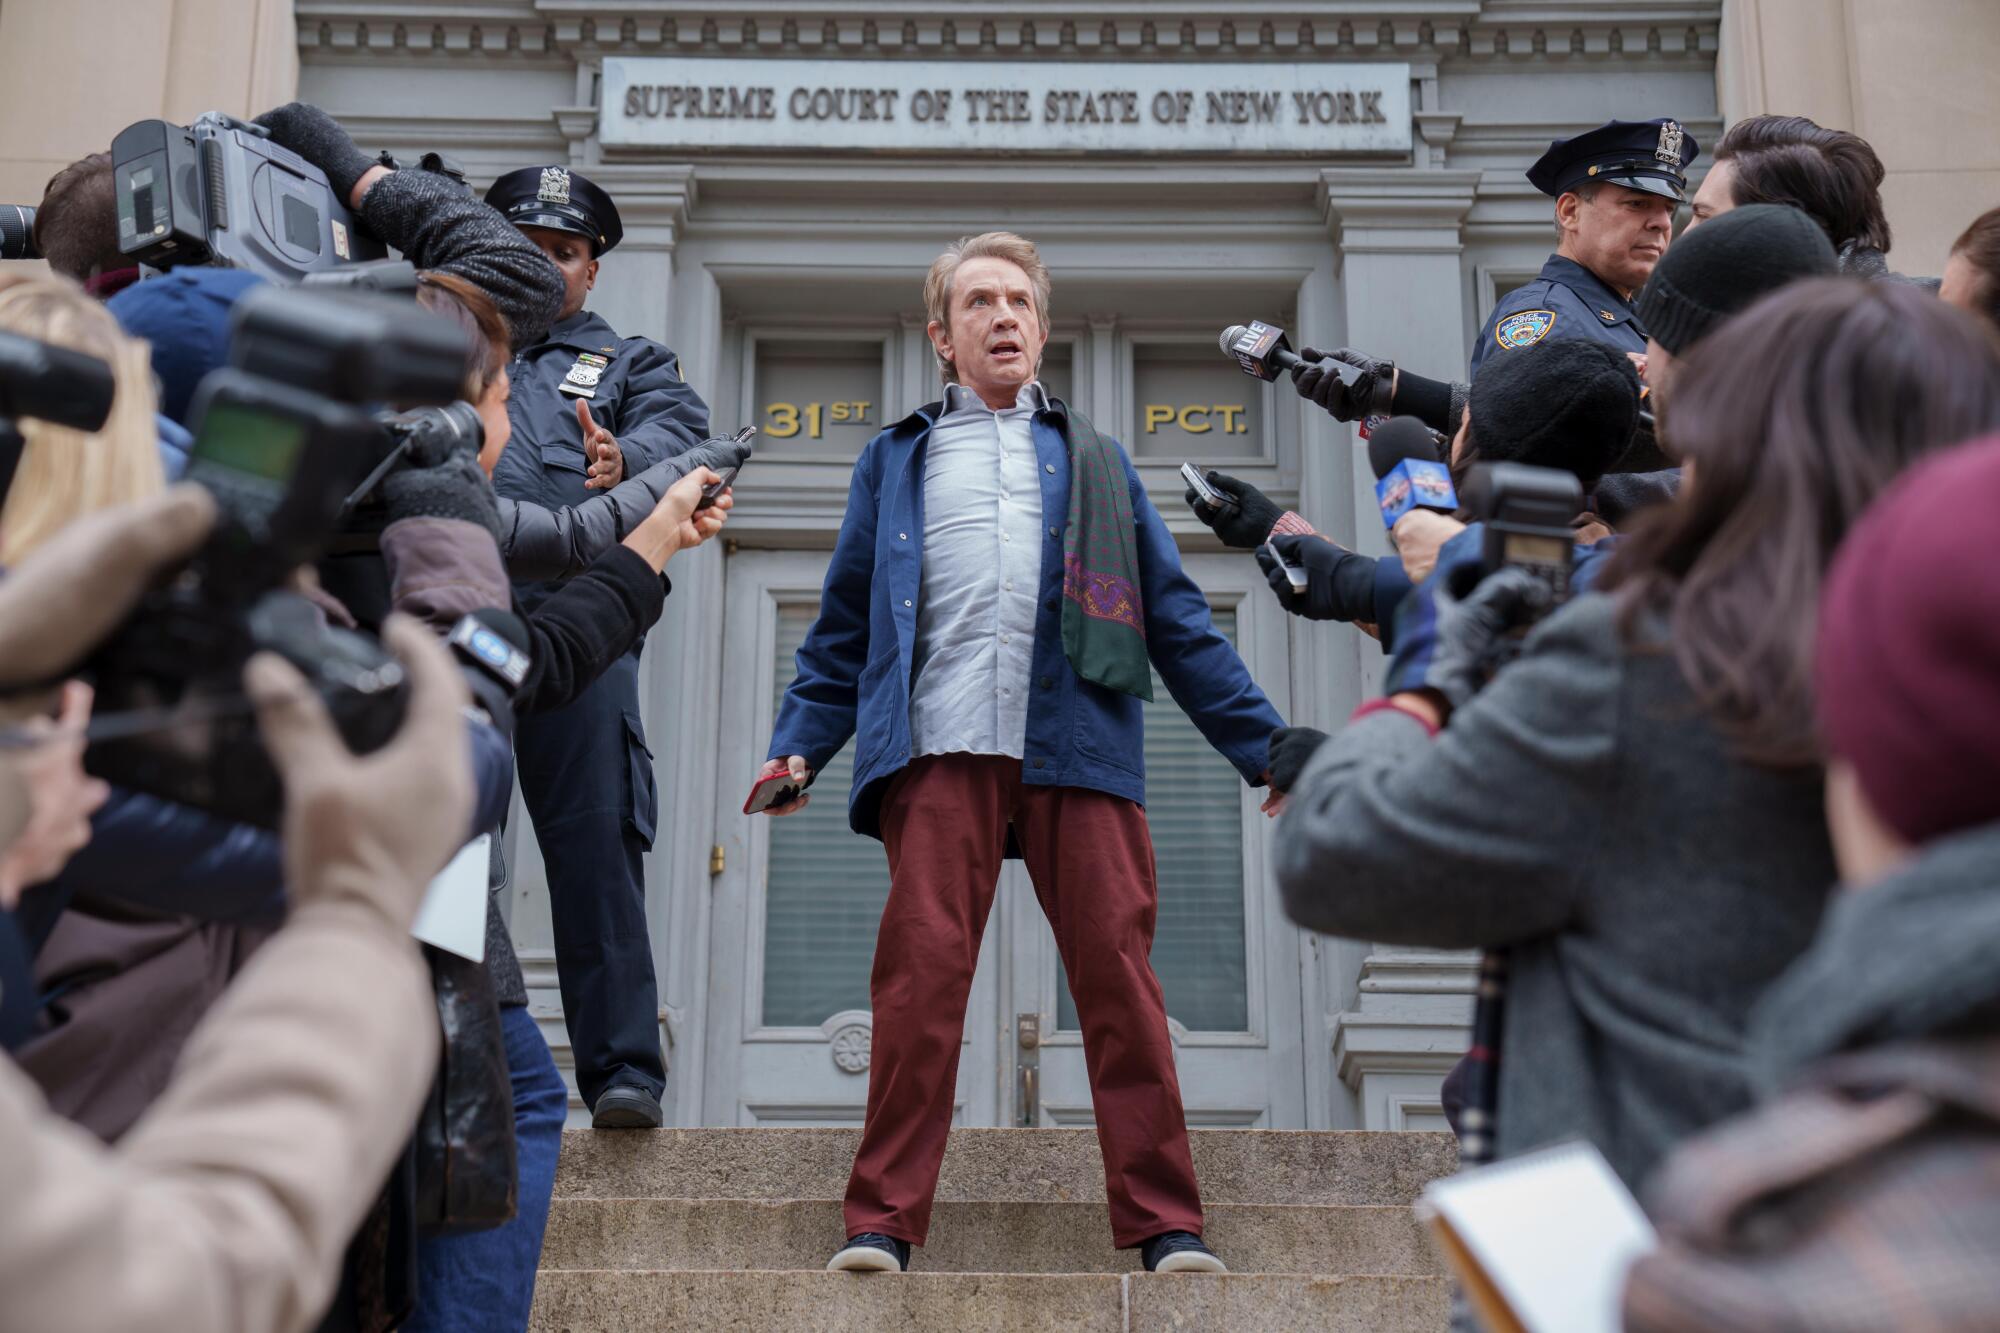 A man exits a courthouse to find a mob of reporters in a scene from "Only Murders in the Building."